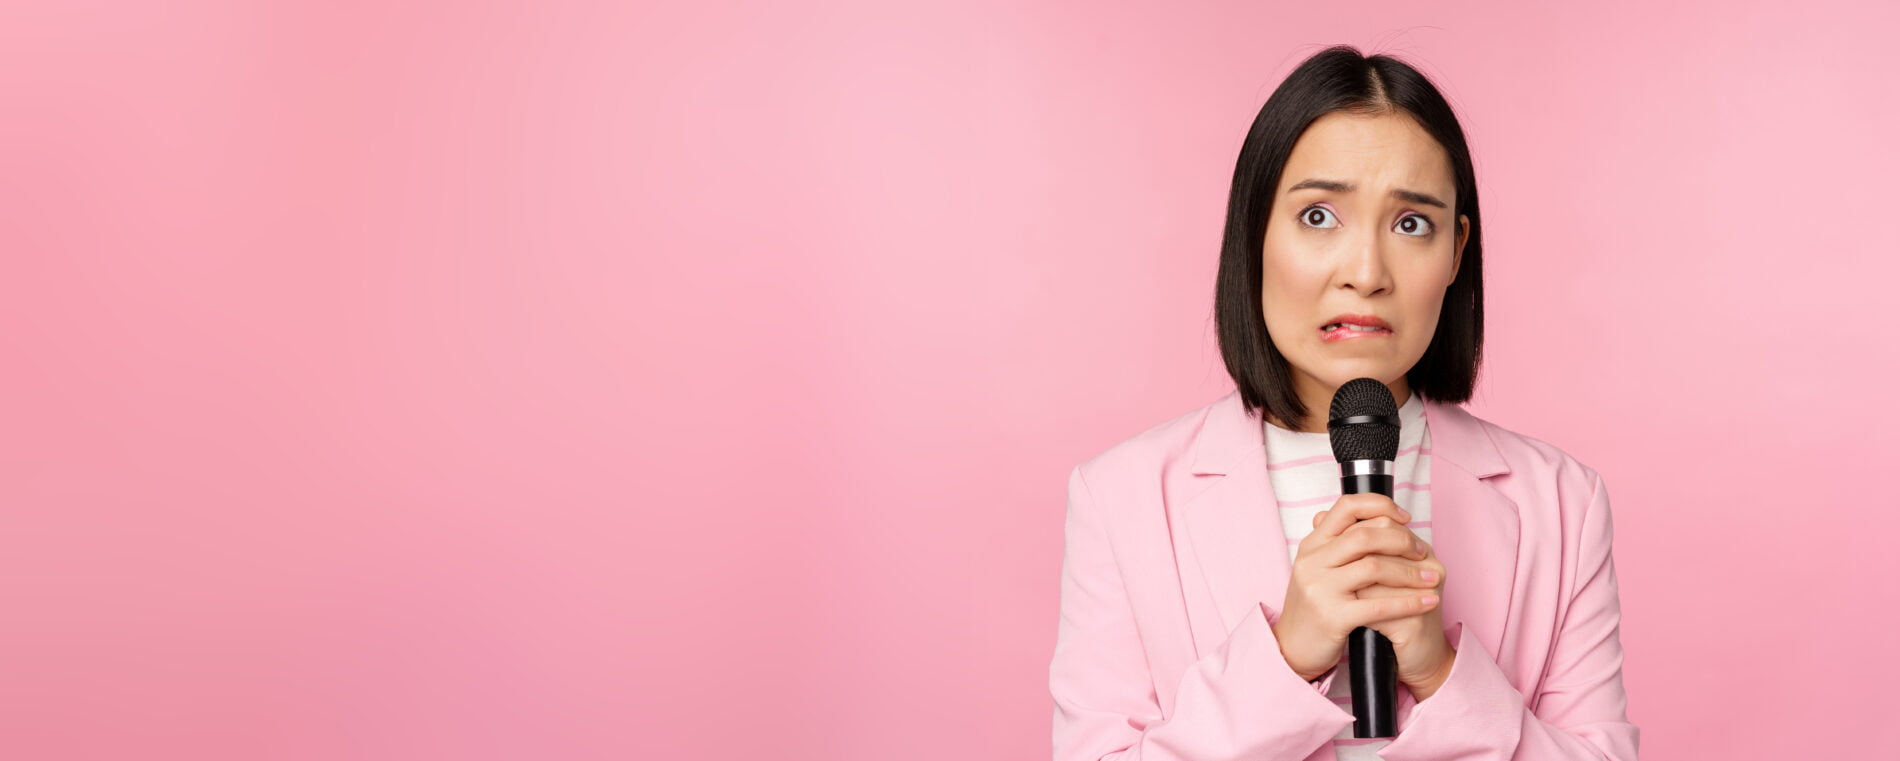 anxious asian lady suit talking public giving speech with microphone conference looking scared standing pink background 74% of People Fear Public Speaking: Here's How to Beat Glossophobia